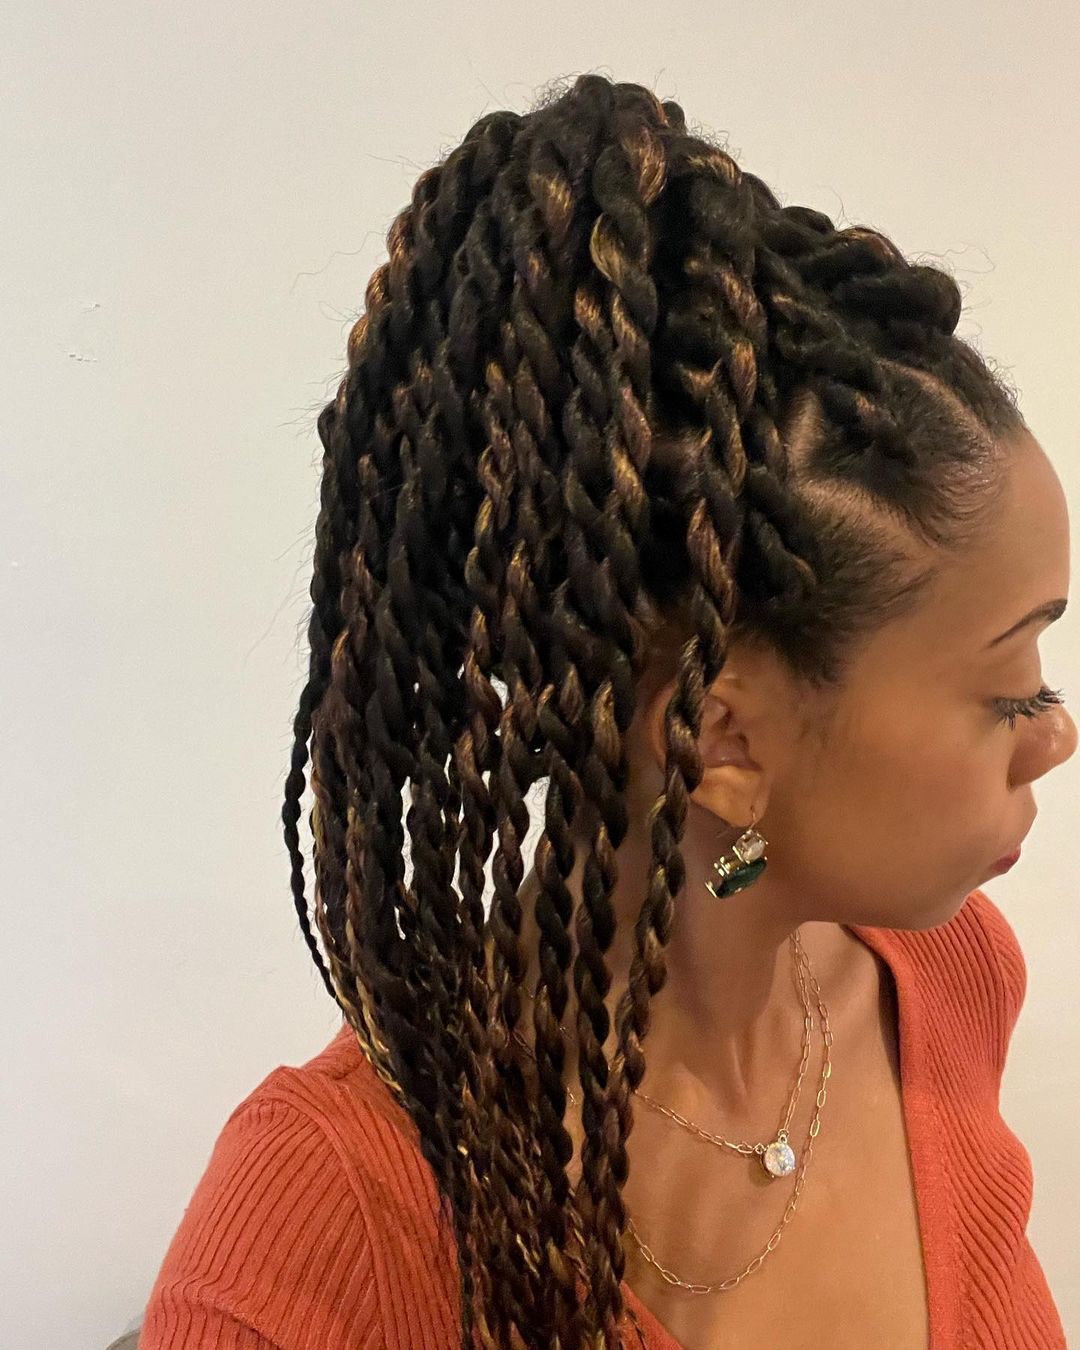 2. Black And Brown Mix Rope Twists With Extension